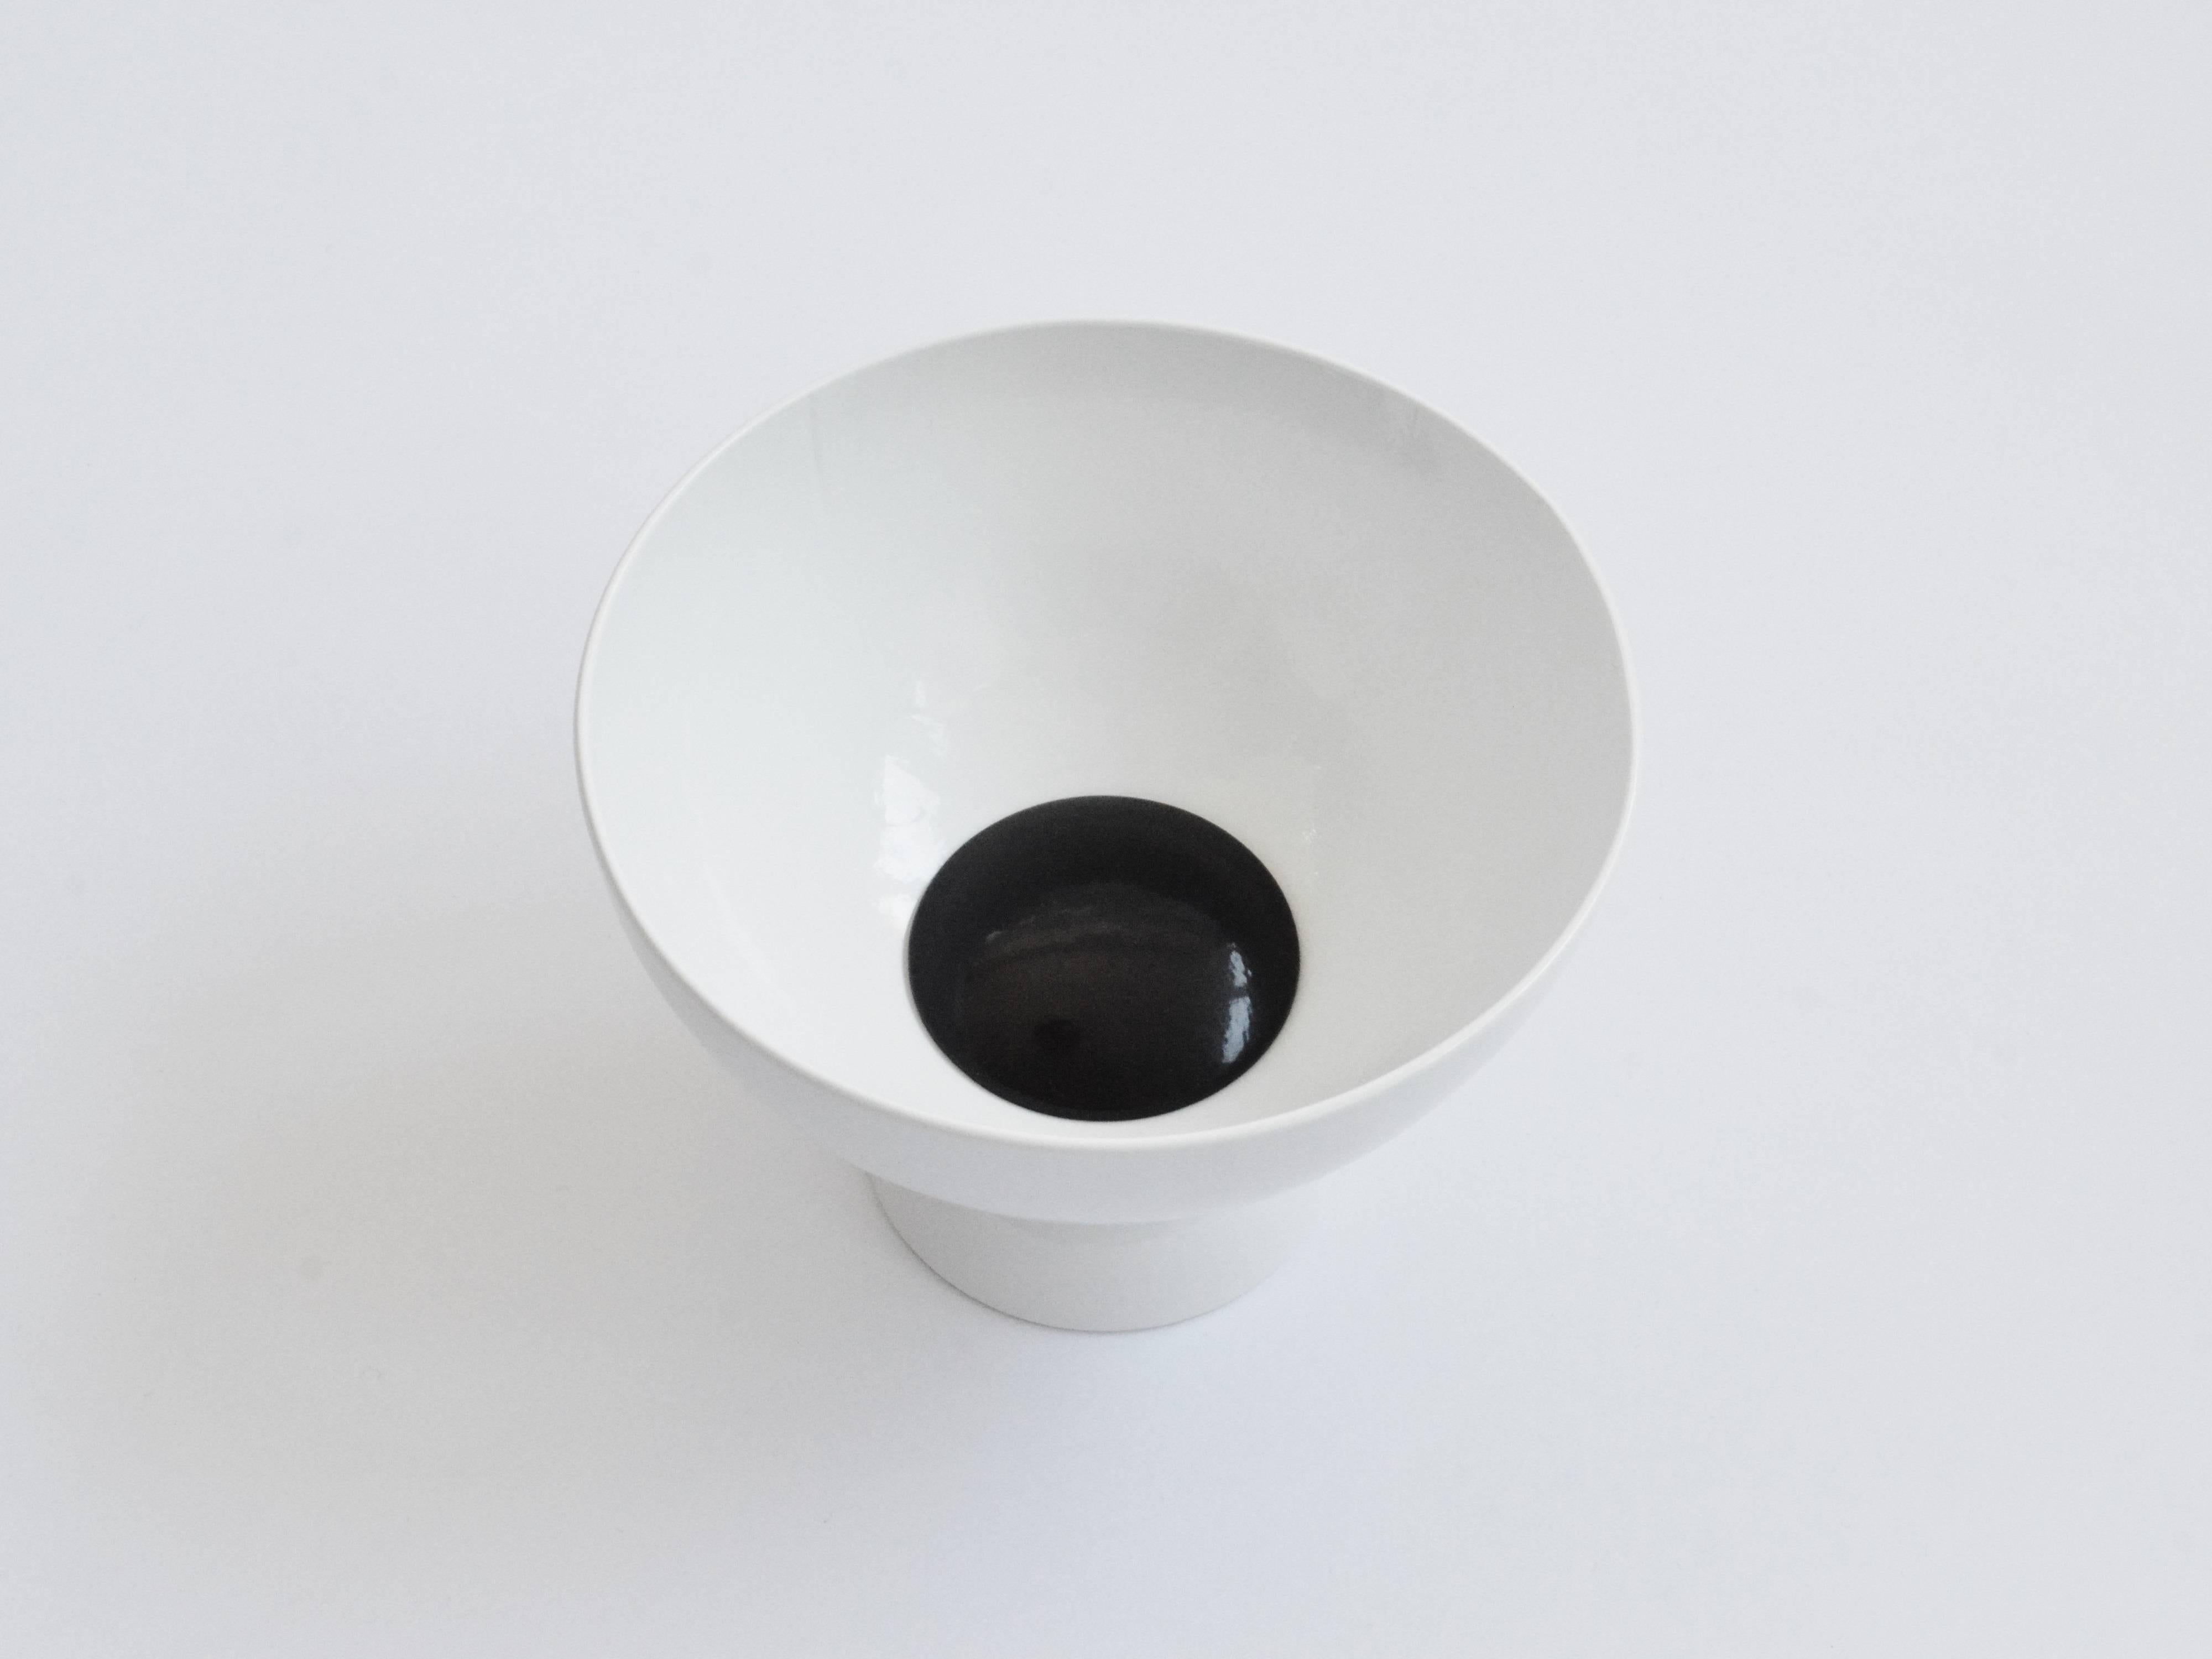 Contemporary bowl designed and made by independent product and furniture designer Connor Holland.

The Huygens Bowl is part of the Saturn Six range, a series of designs inspired by space exploration and the Saturn V rocket. The smallest of the three